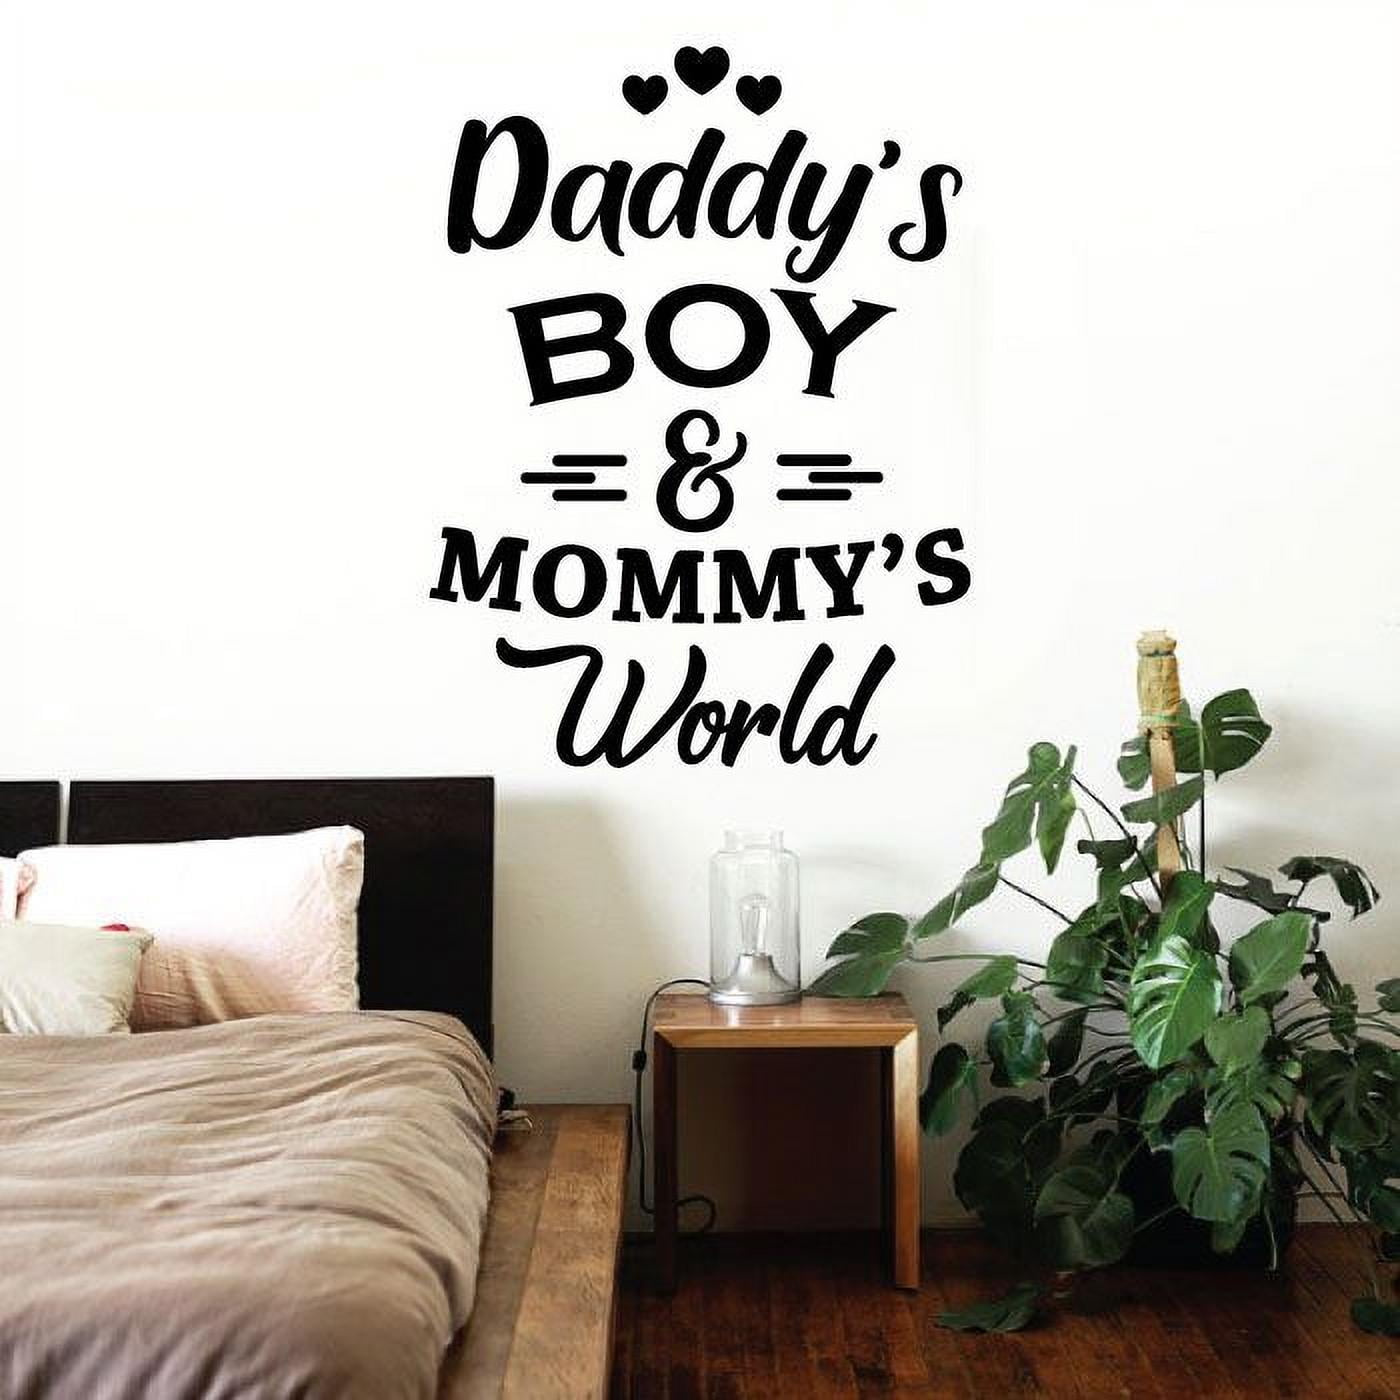 Wall Art Stickers Have A Nice Day Kids Removable Home Decals Bedroom quotes D 